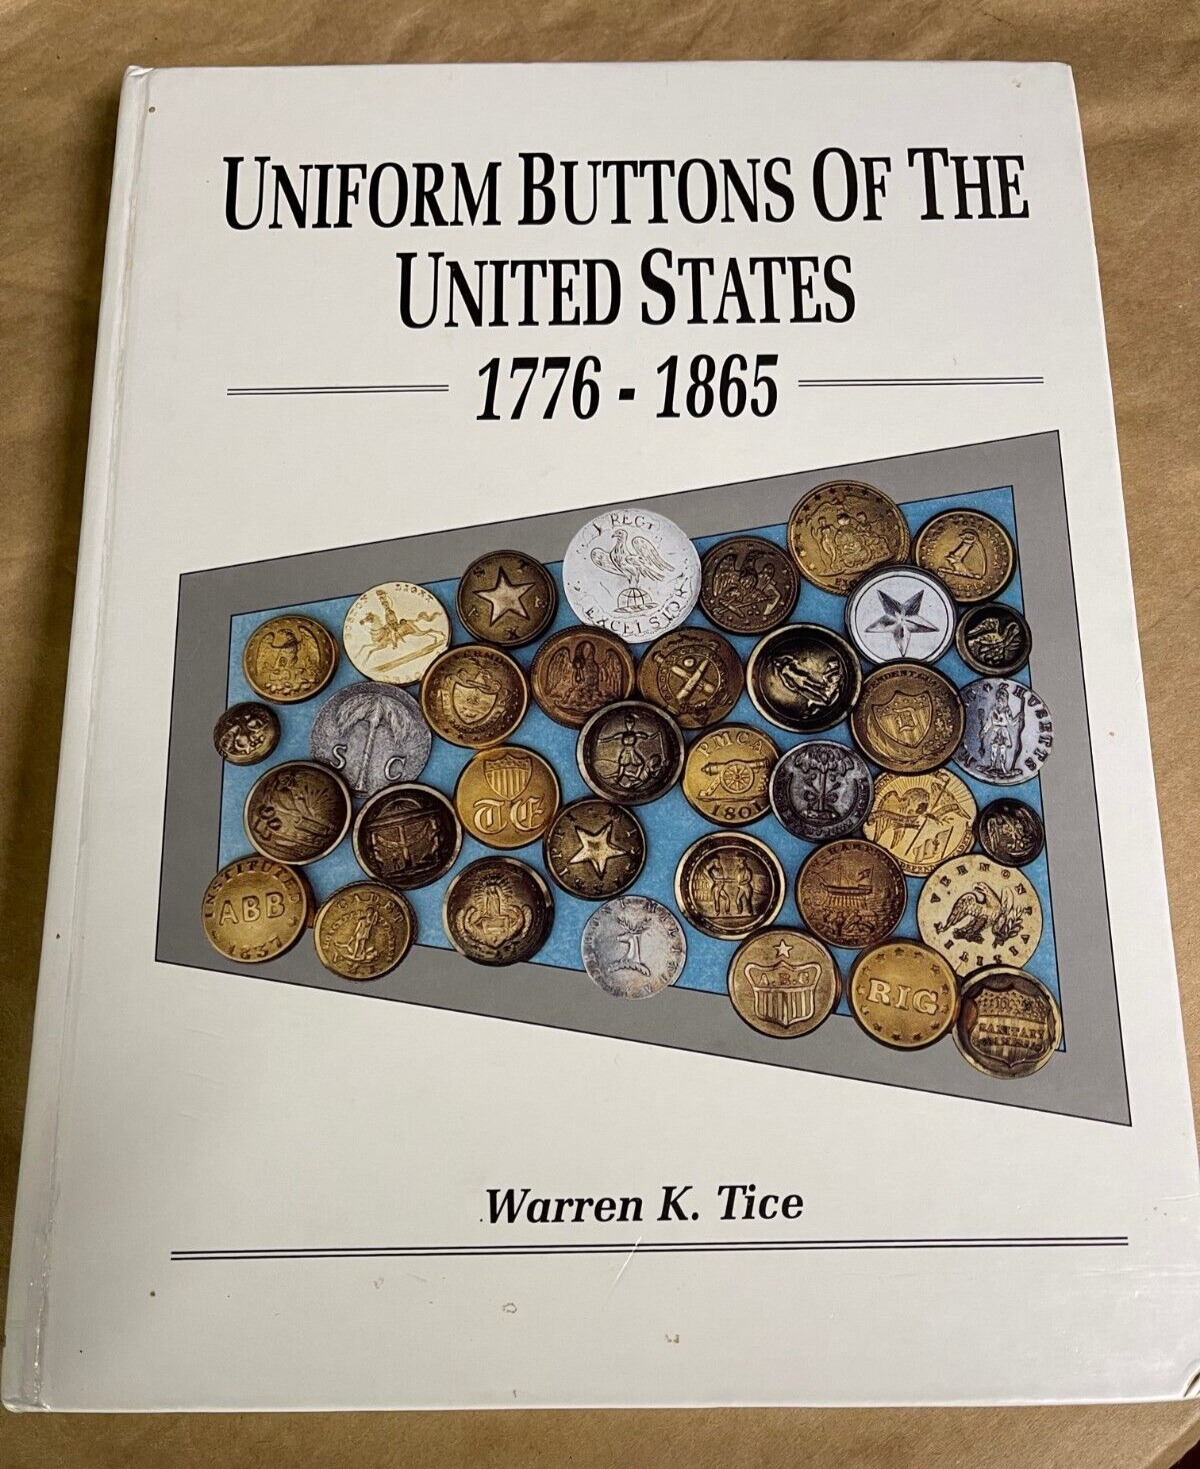 Uniform Buttons of the United States: 1776-1865; Civil War book by Warren K Tice